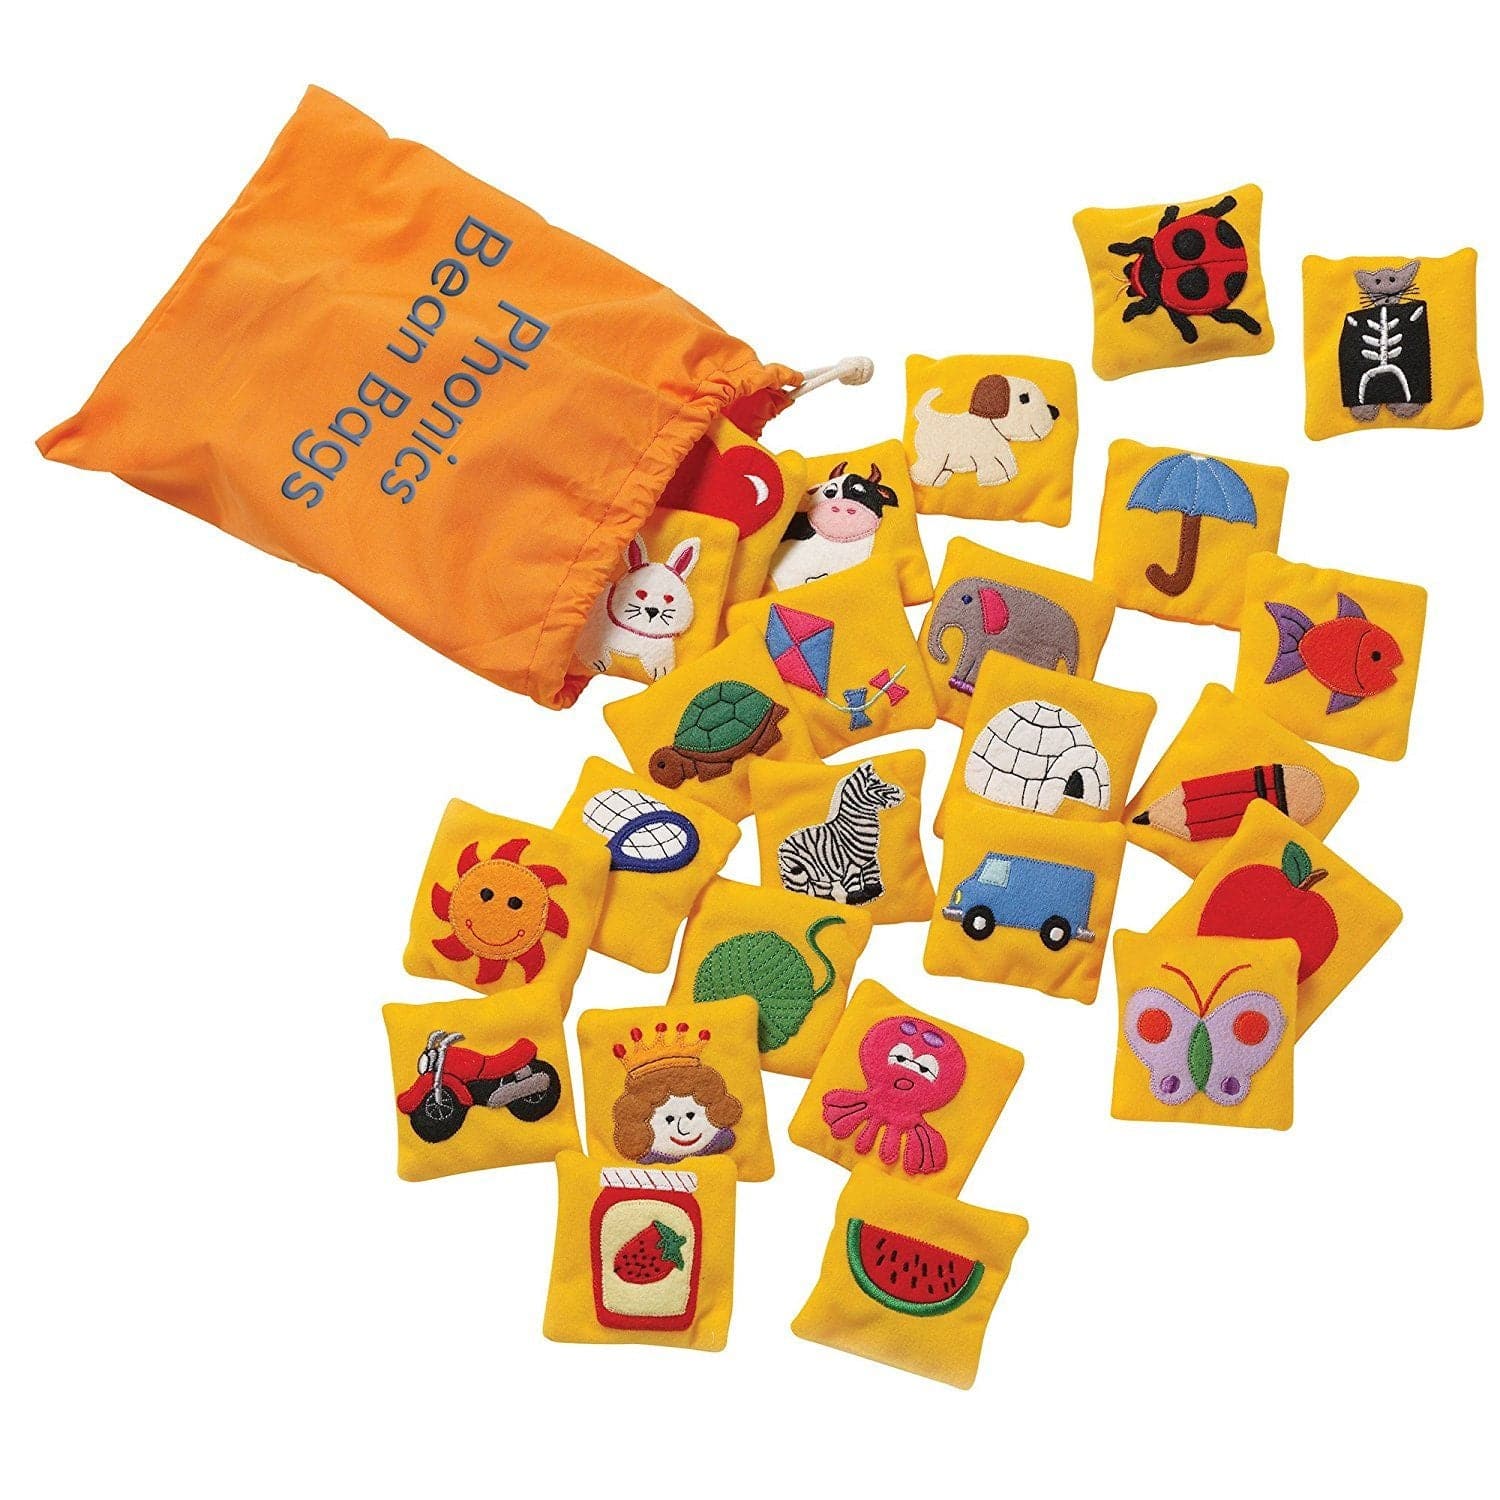 Phonics Bean Bags, These colourful 9cm embroidered Phonics bean bags are a great tactile way to reinforce letters and sounds. Each Phonic bean bag features an appealing picture representing the letter, with special double-sided bean bags for short and long vowel sounds, and the hard and soft sounds of c and g. The Phonic bean bag set Includes cloth storage bag and Activity Guide. Encourage phonic sound recall Each bean bag features a picture that represents a sound 26 embroidered bean bags Includes Activity